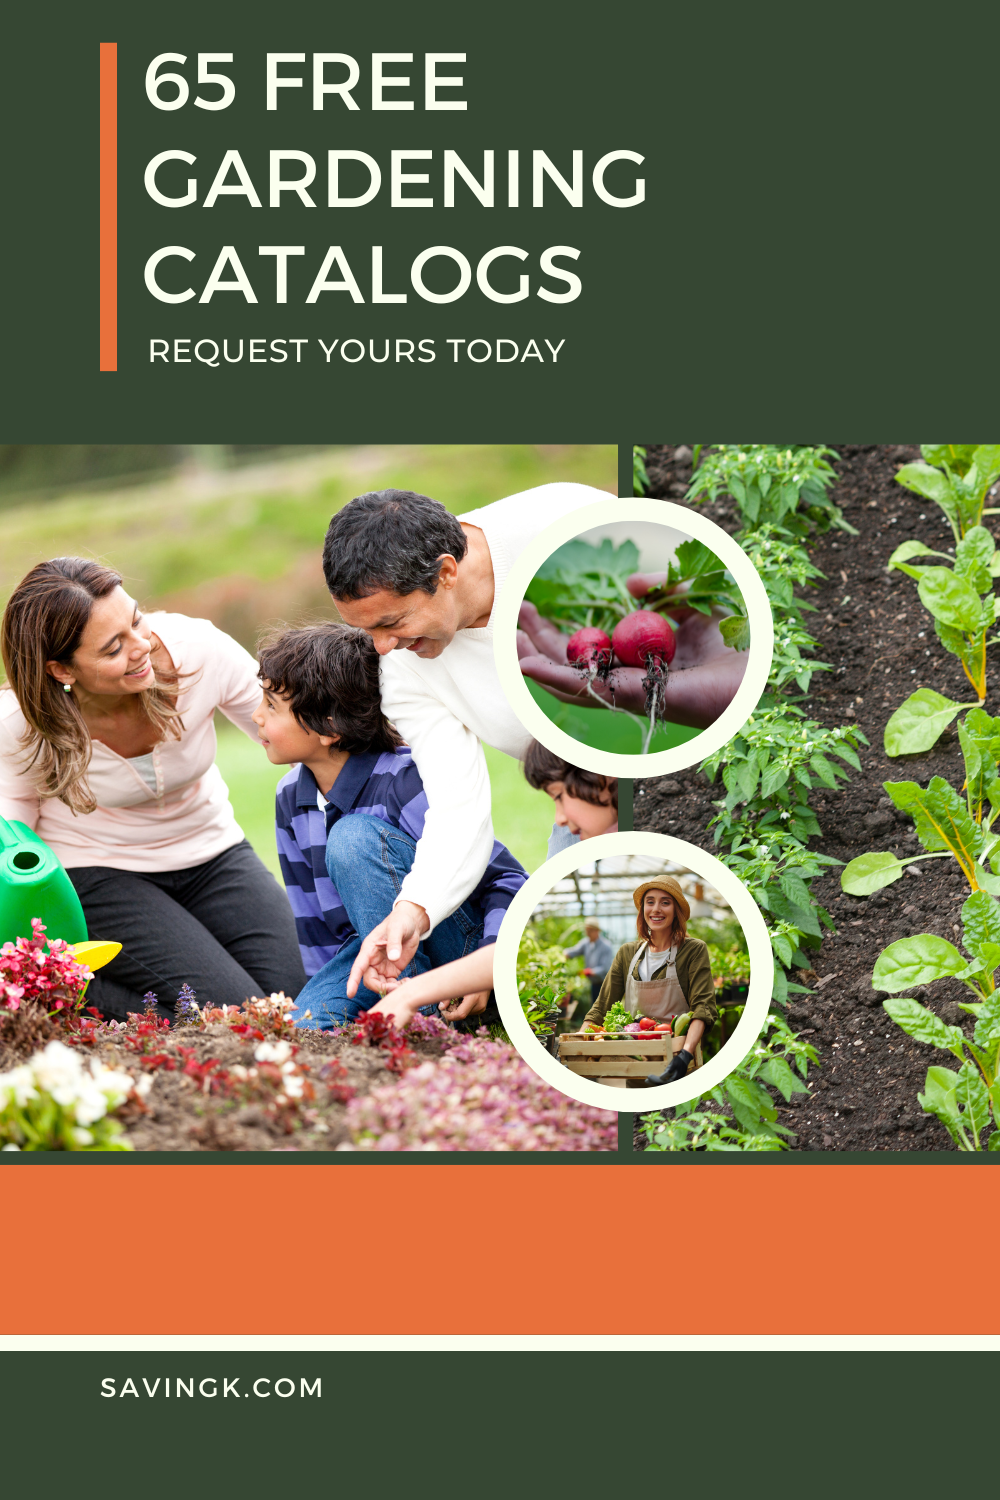 65 Free Gardening Catalogs - Request Yours Today